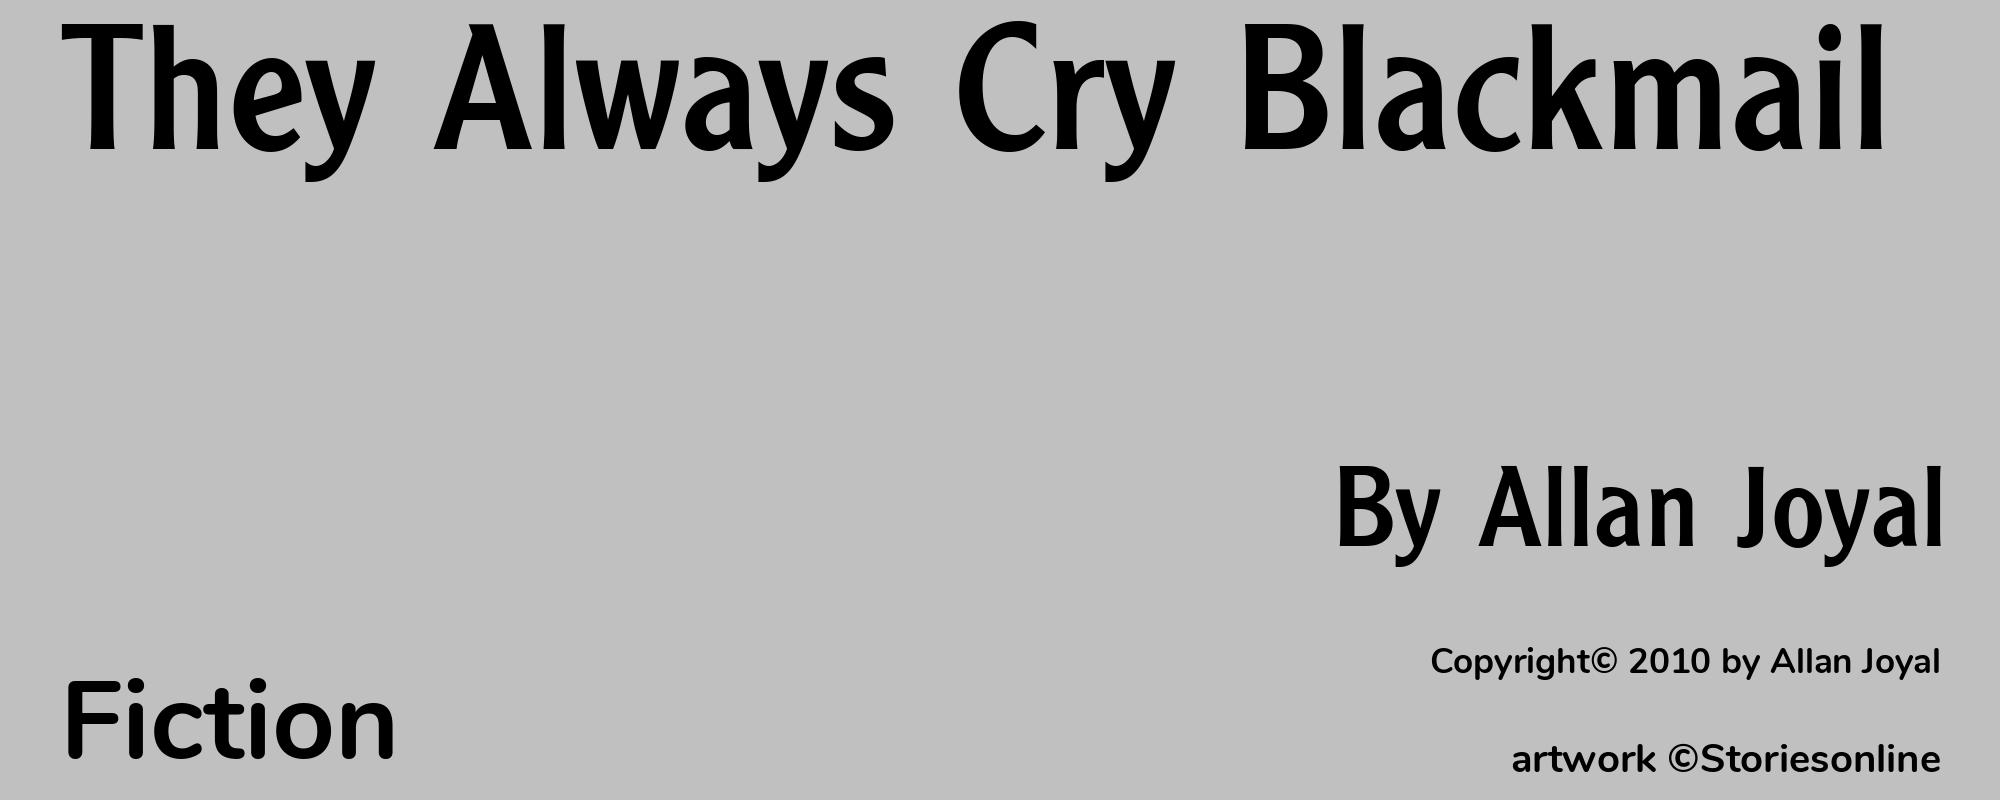 They Always Cry Blackmail - Cover